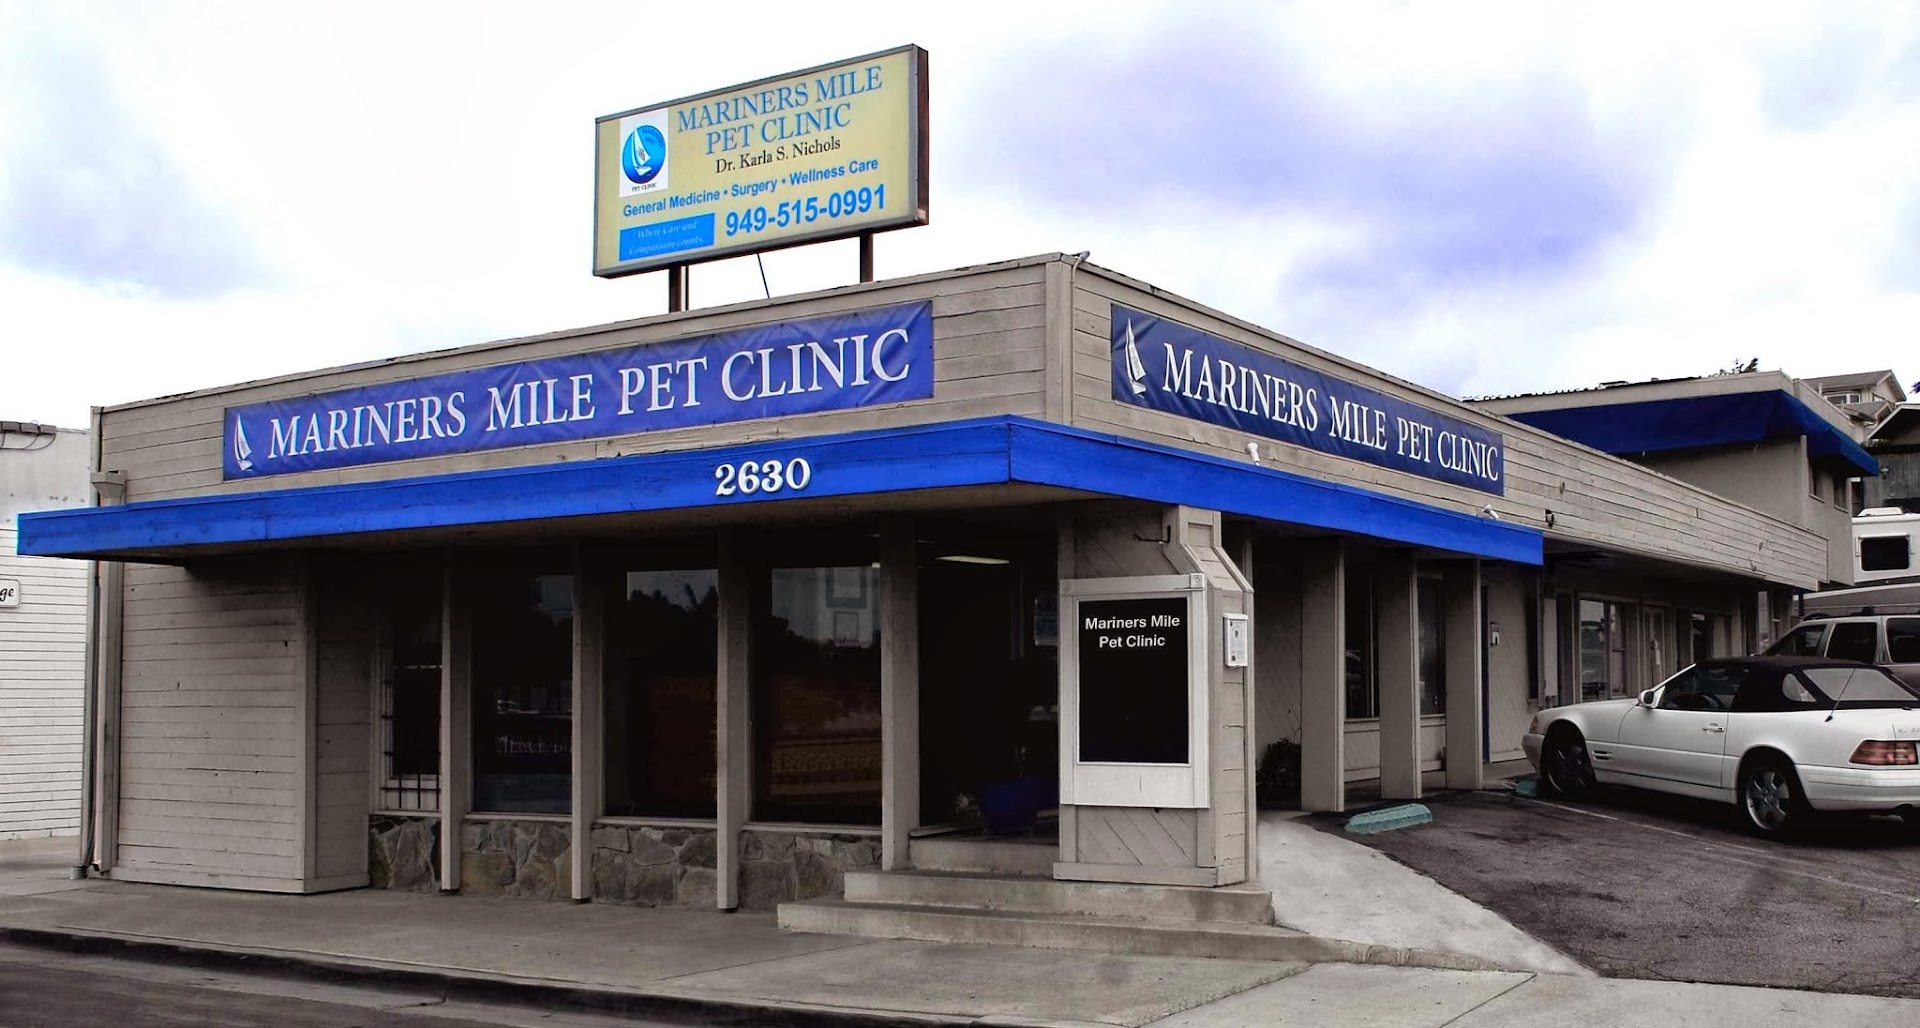 Mariners Mile Pet Clinic